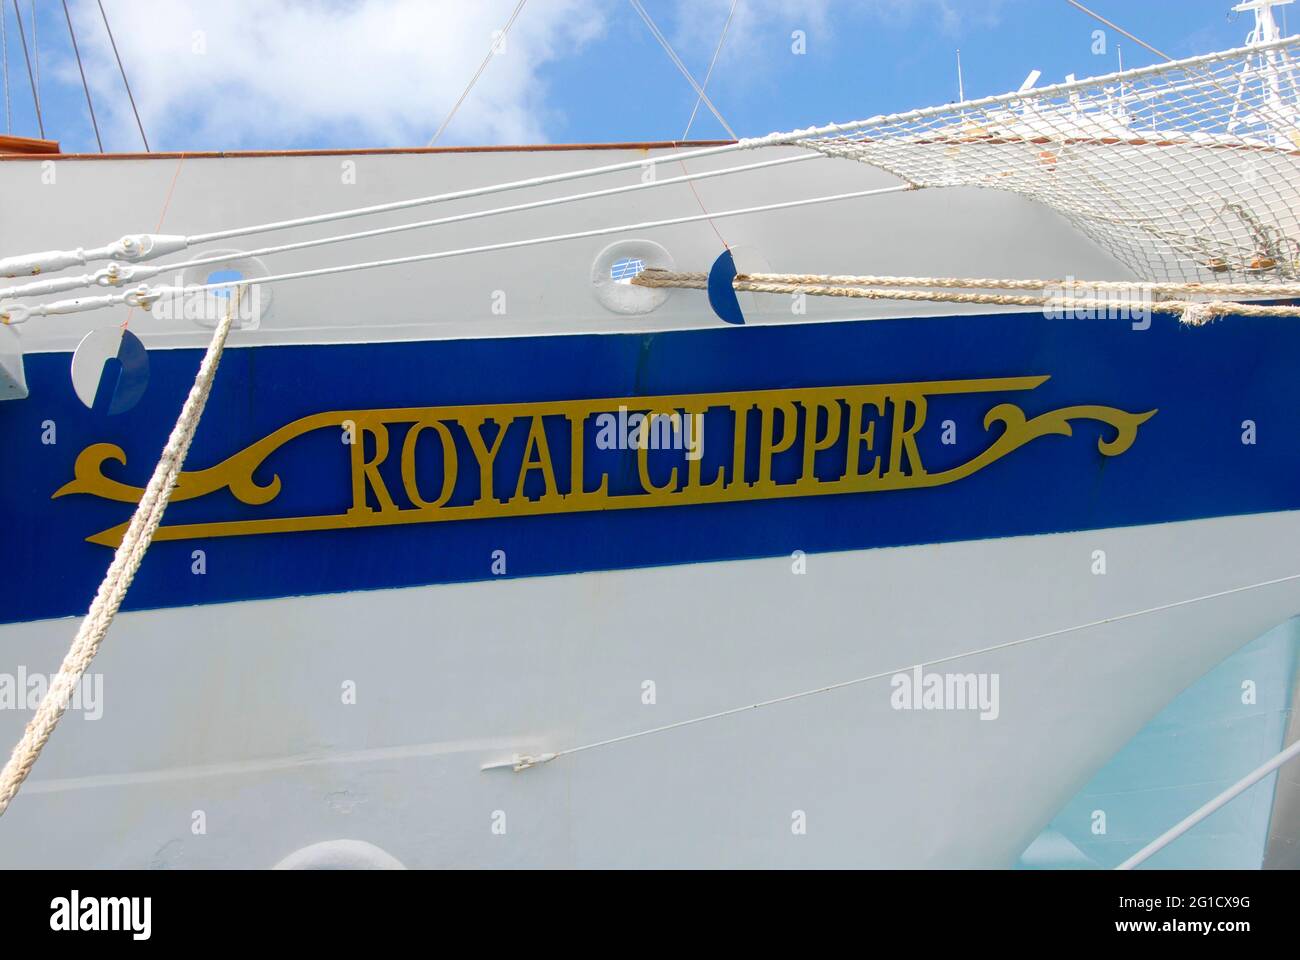 The name 'Royal Clipper' on the bow of the five-masted tall ship while berthed in Barbados, Caribbean sailing as a luxury cruise liner Stock Photo